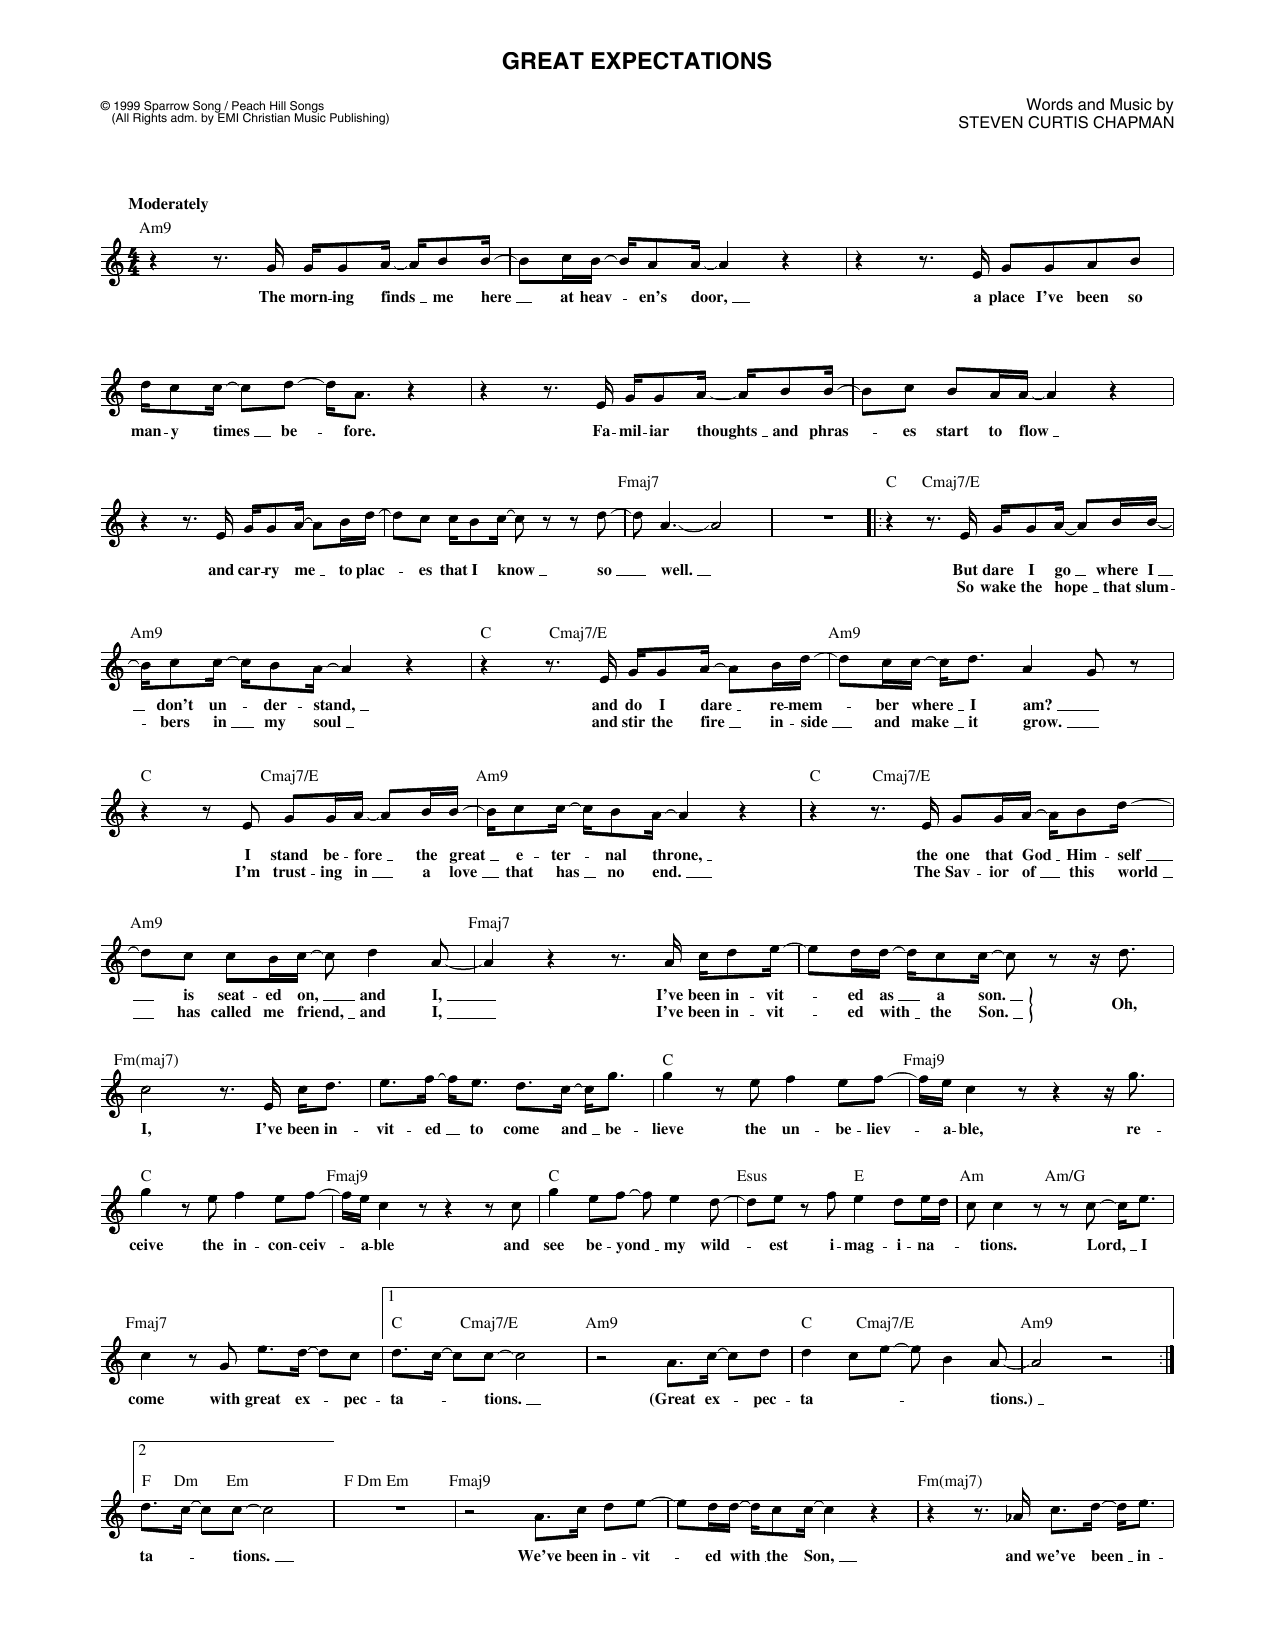 Steven Curtis Chapman Great Expectations sheet music notes printable PDF score